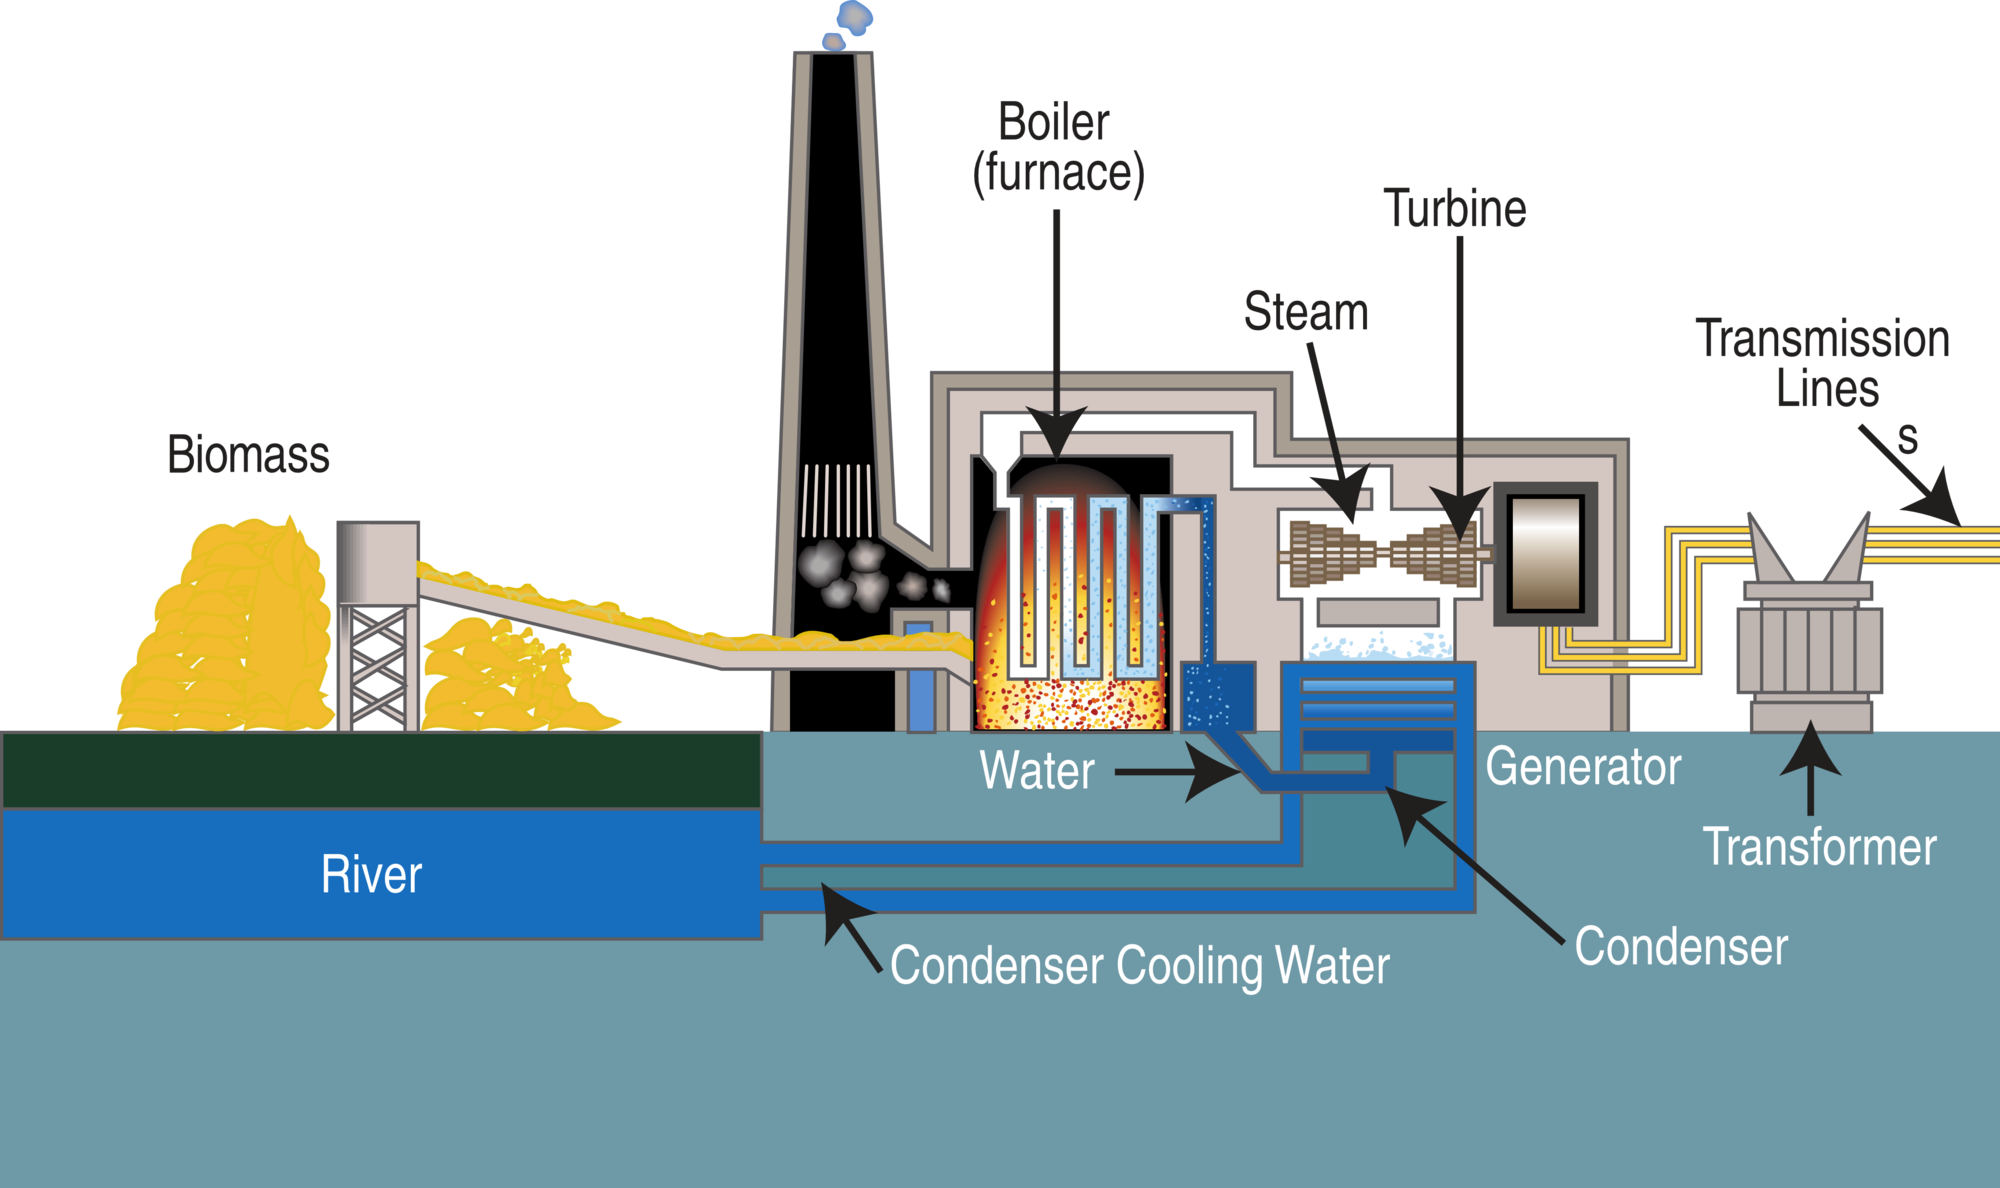 Biomass fired power plant diagram